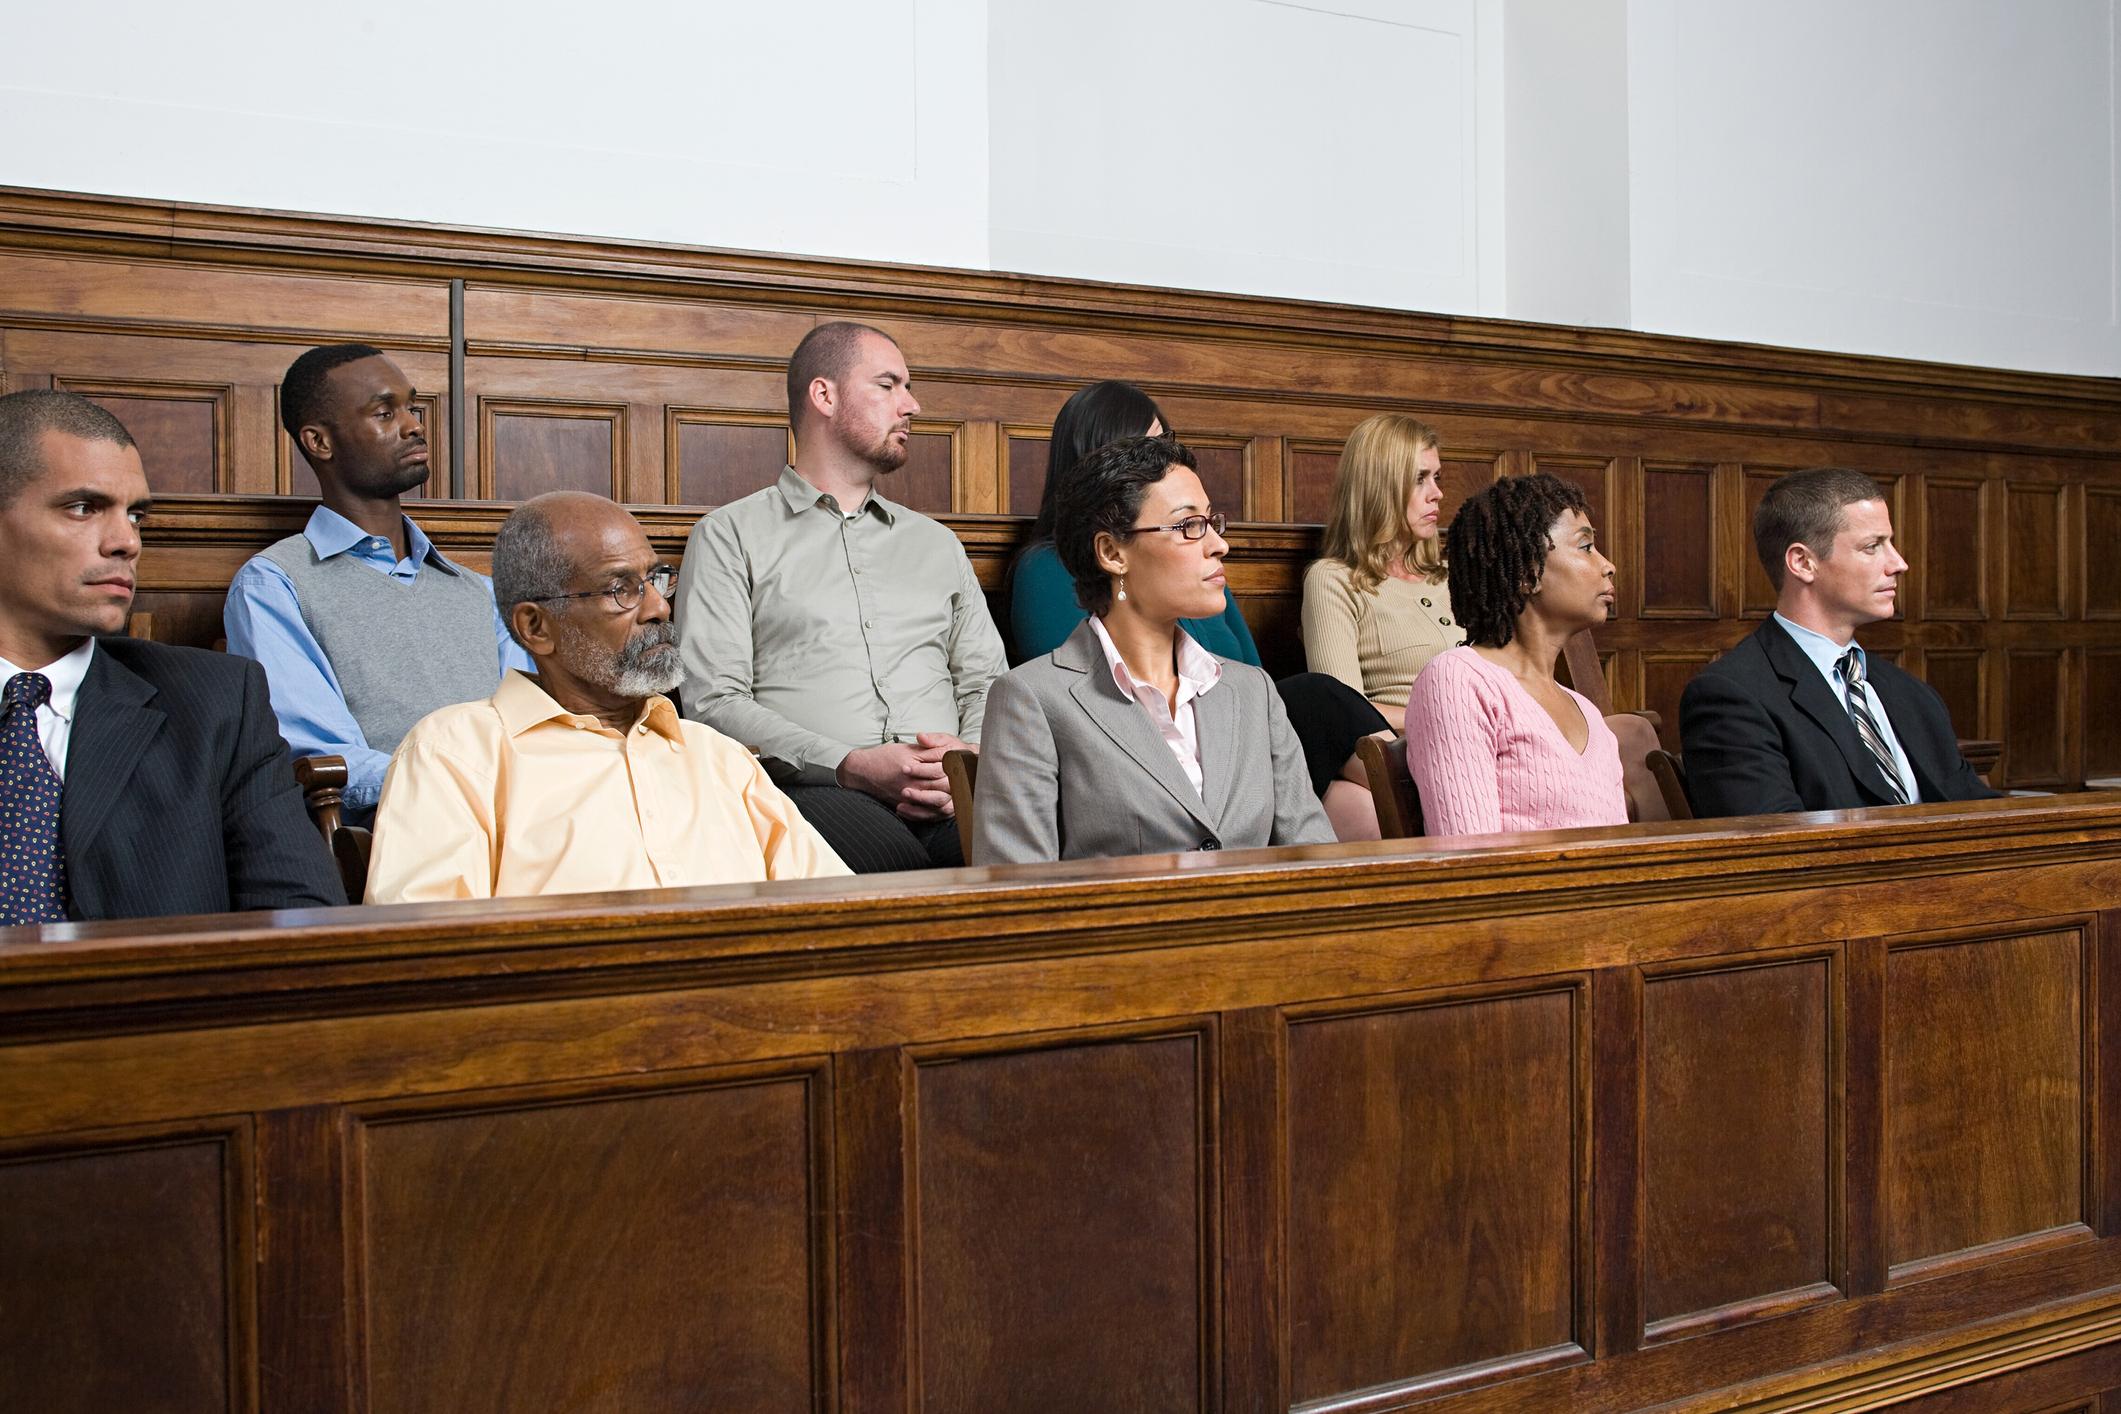 What is the longest jury deliberation in history, and how long did it take?